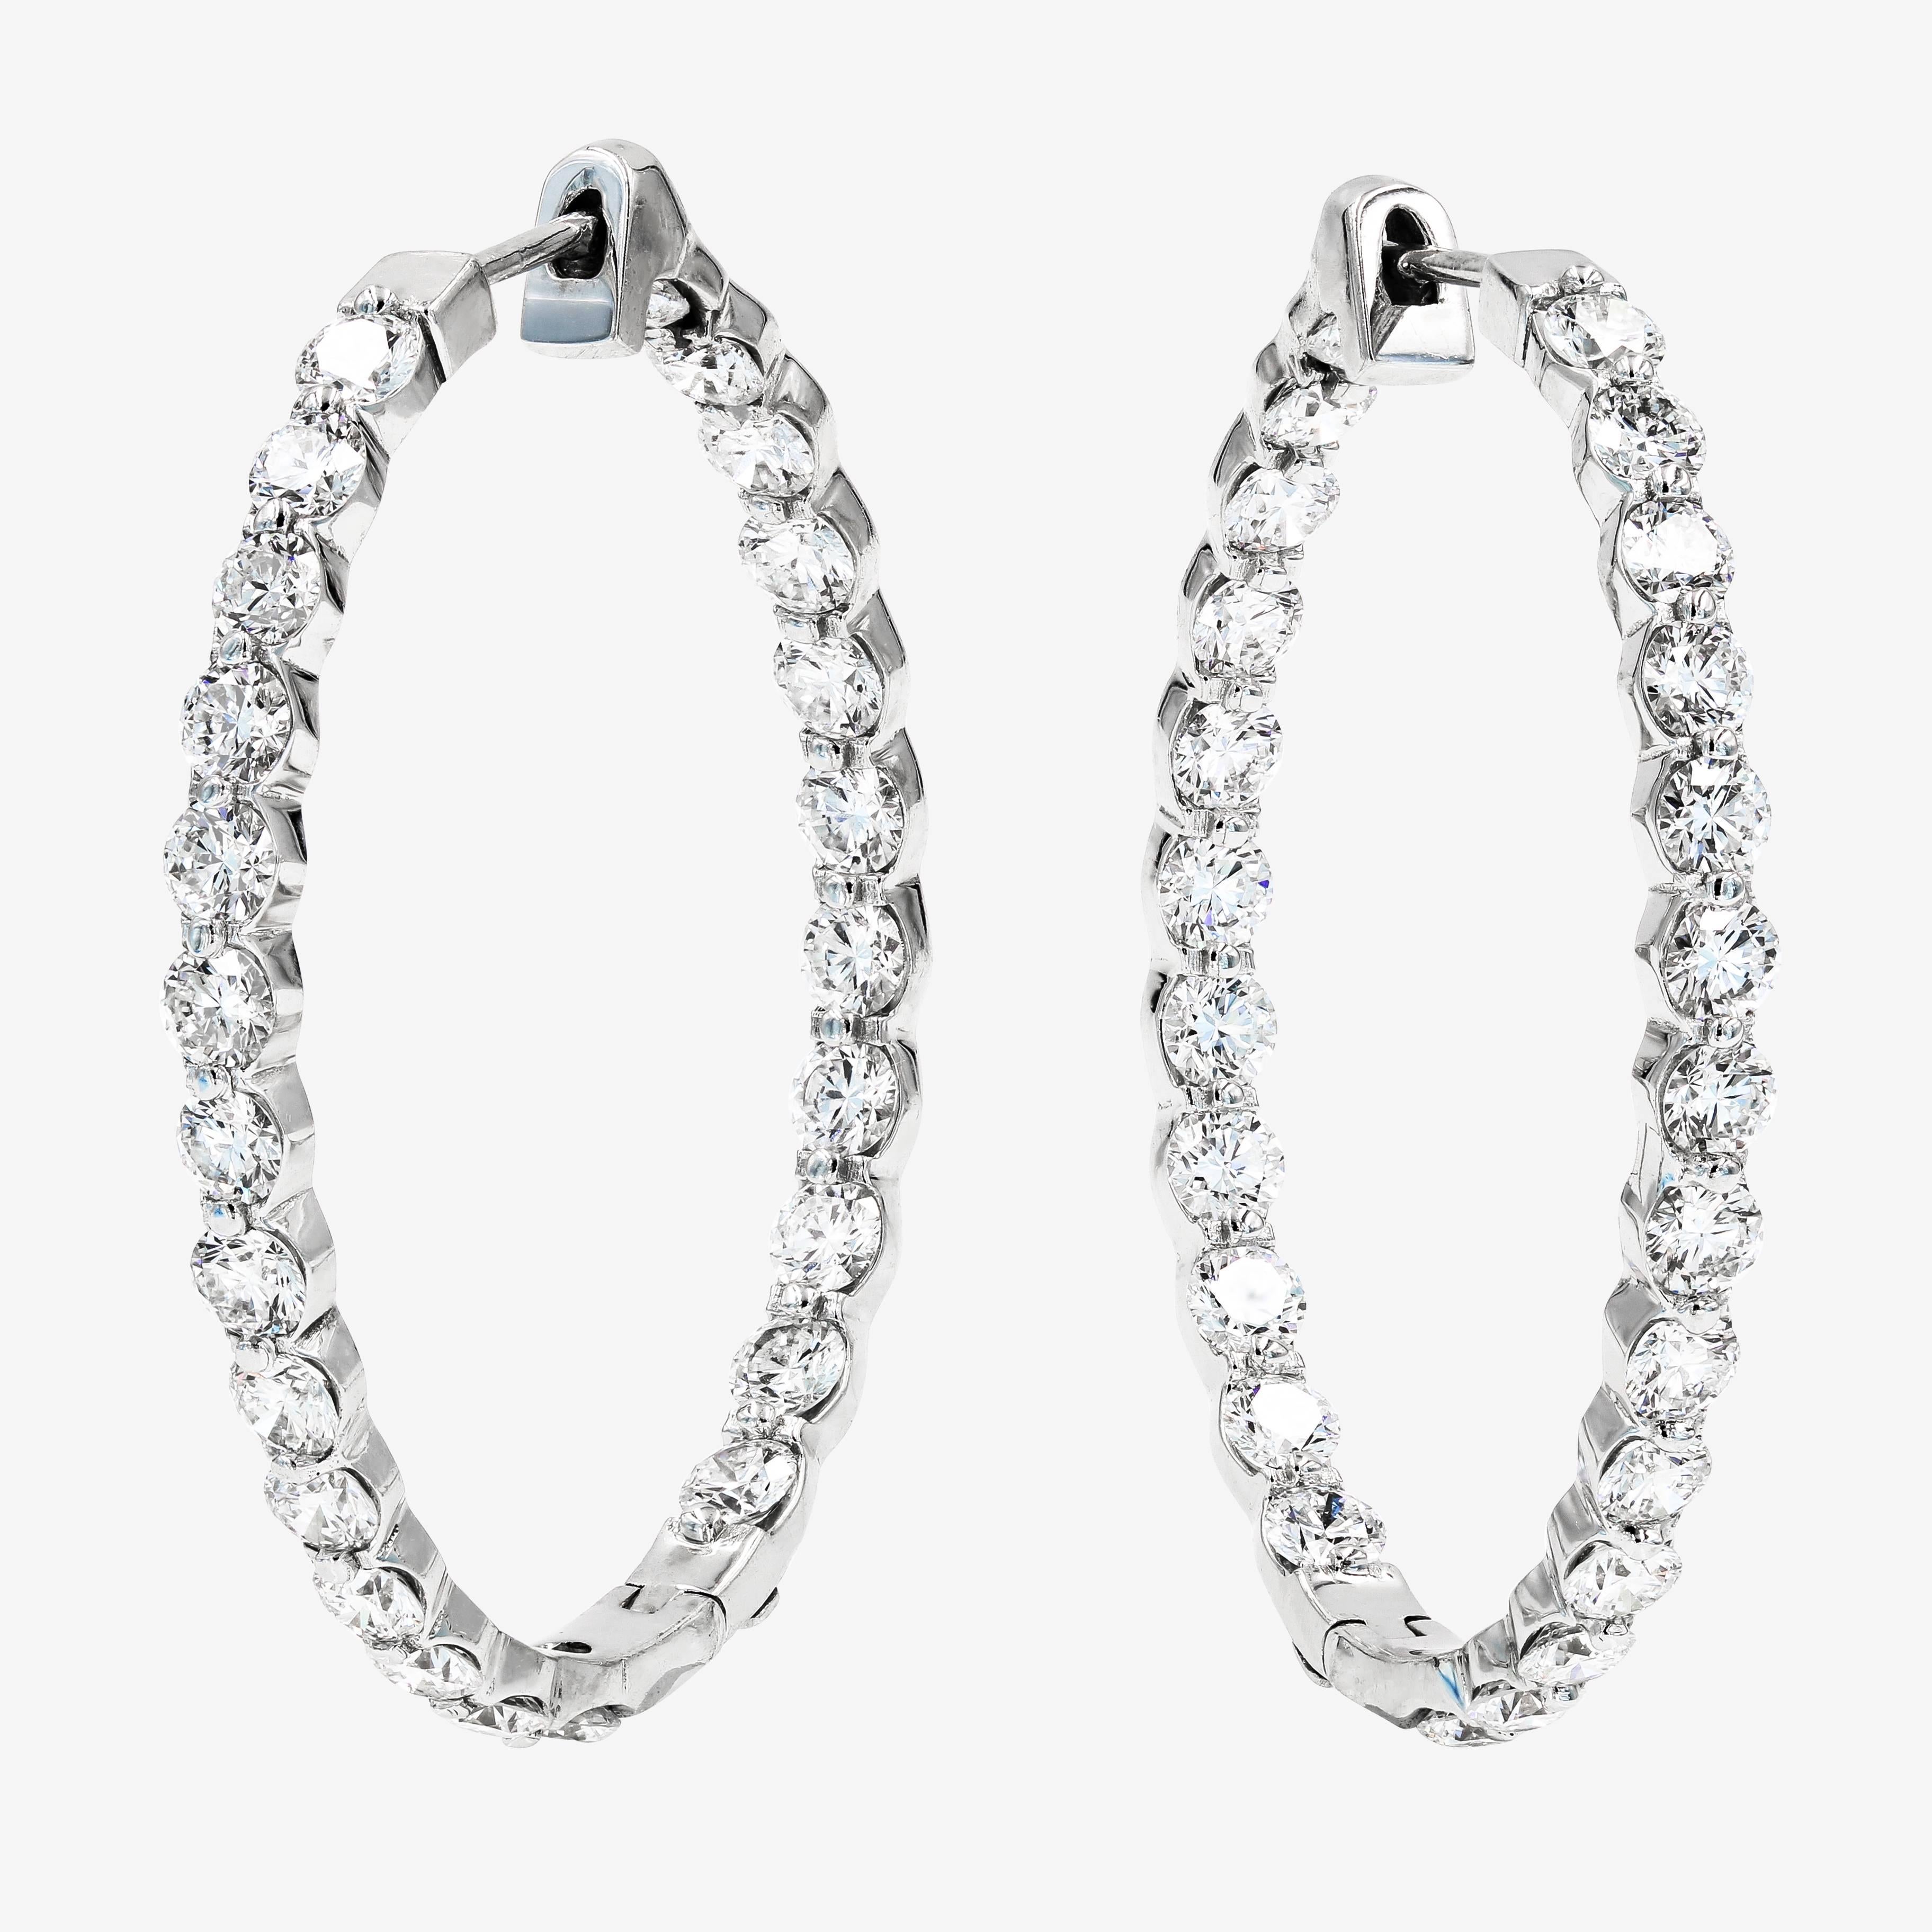 Lester Lampert original hoop earrings are set with 50 ideal cut round diamonds= 6.84cts. t.w. (the diamonds are G in color and VS in clarity) in 18kt. white gold

Every Lester Lampert piece will arrive in an elegant custom jewelry box.